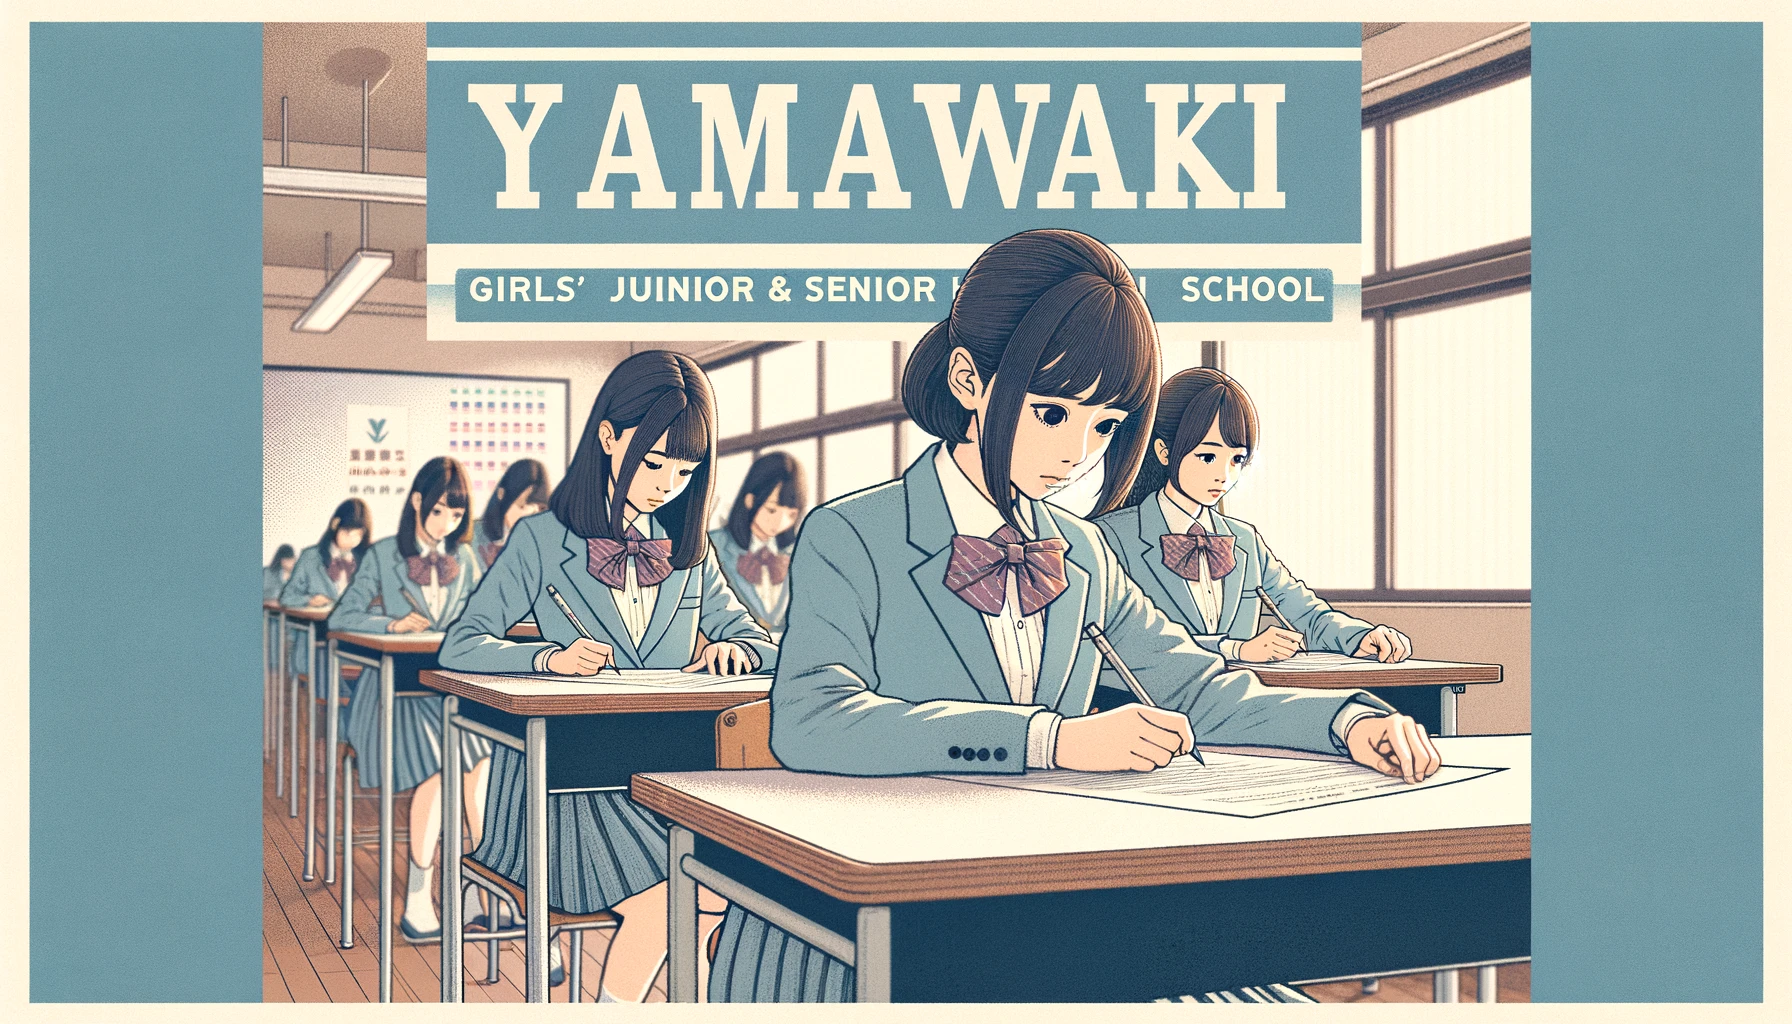 Yamawaki Academy Girls' Junior and Senior High School entrance exams. The image shows female students taking exams in a large exam hall, focused and serious. The image includes the text 'Yamawaki' prominently displayed.